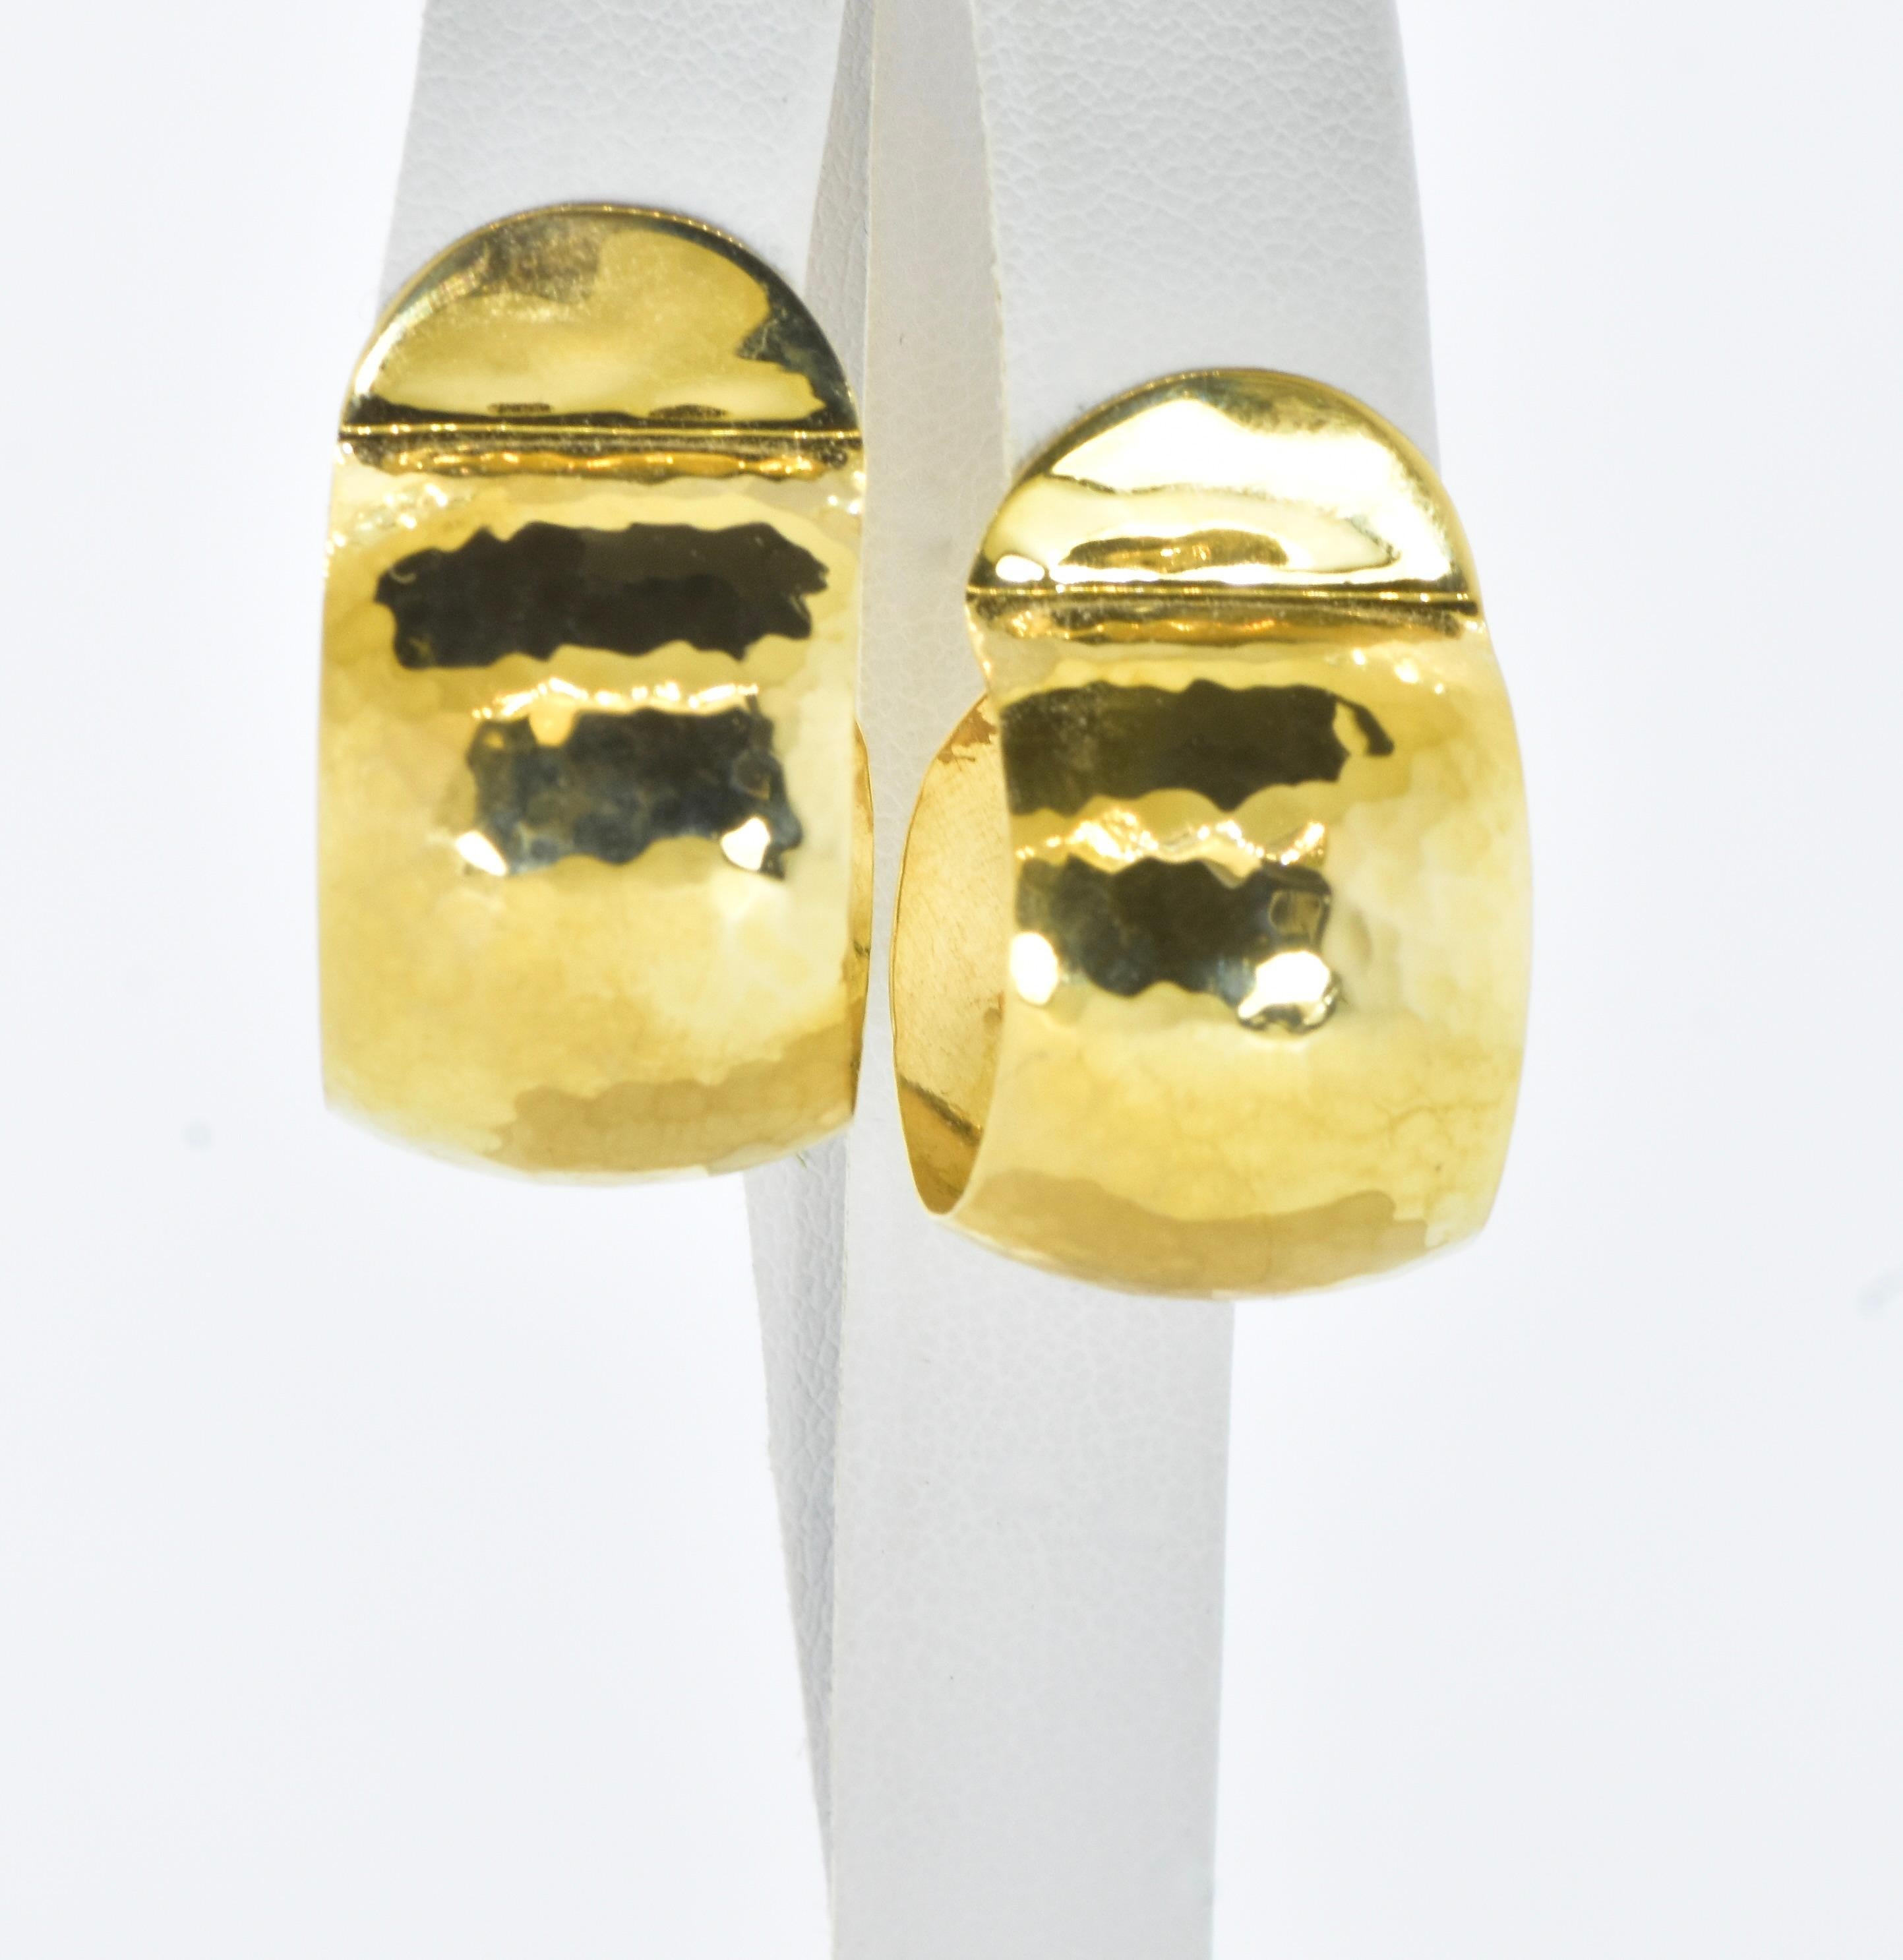 Women's or Men's Hoop Style Earrings in Bright Yellow Gold, Hammered Finish Contemporary, c. 2000